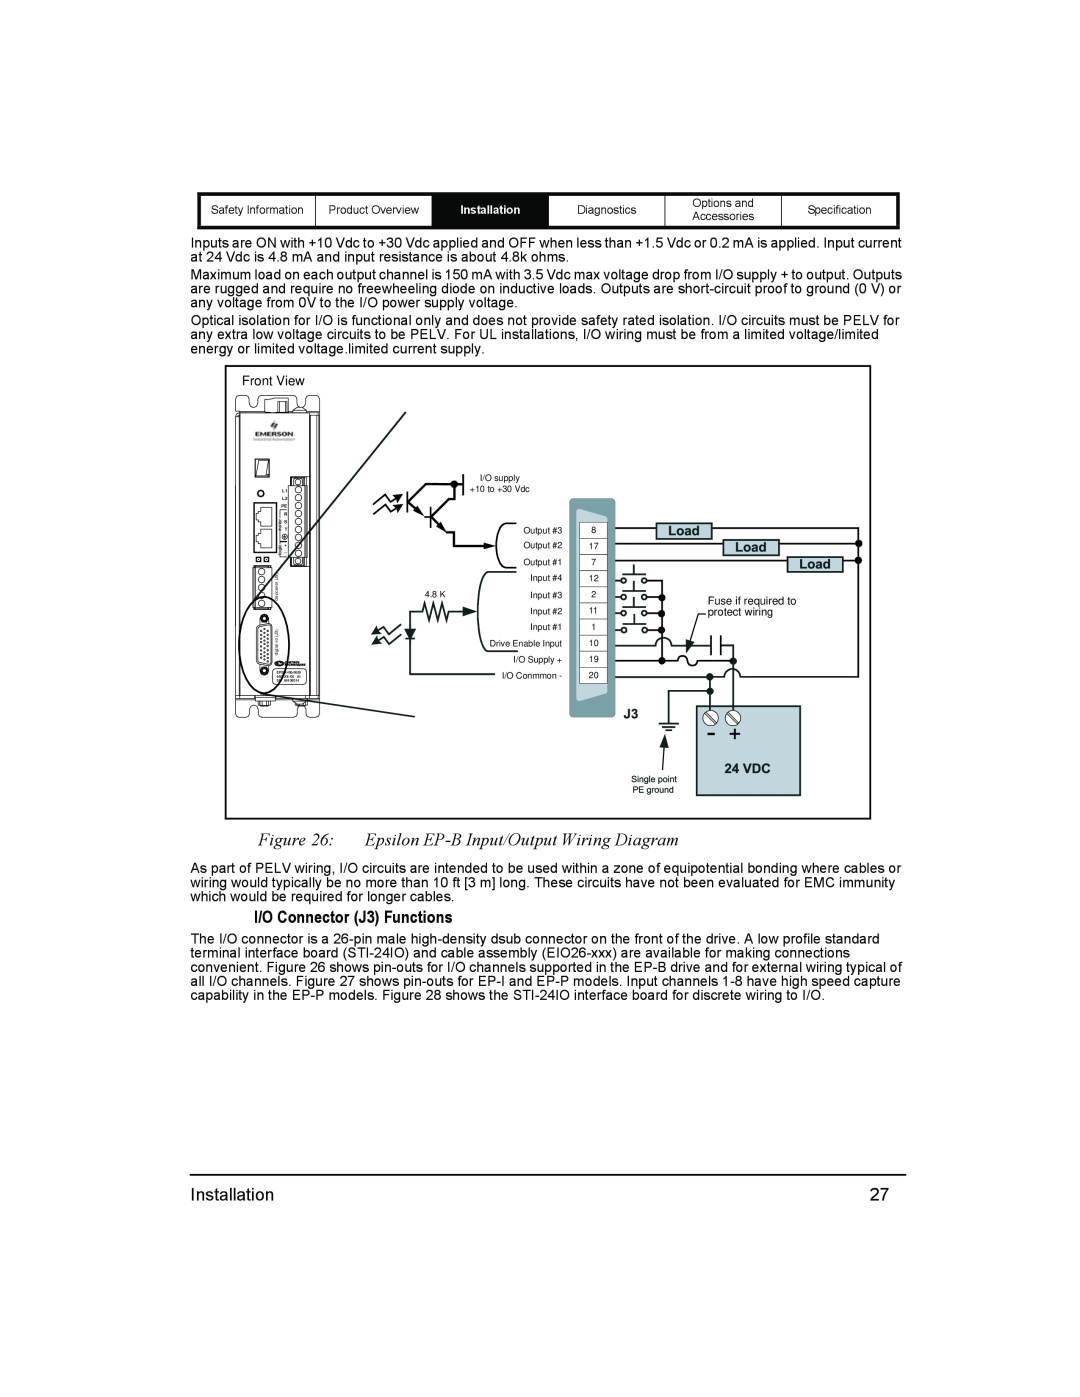 Emerson 400518-01 installation manual Epsilon EP-B Input/Output Wiring Diagram, I/O Connector J3 Functions 